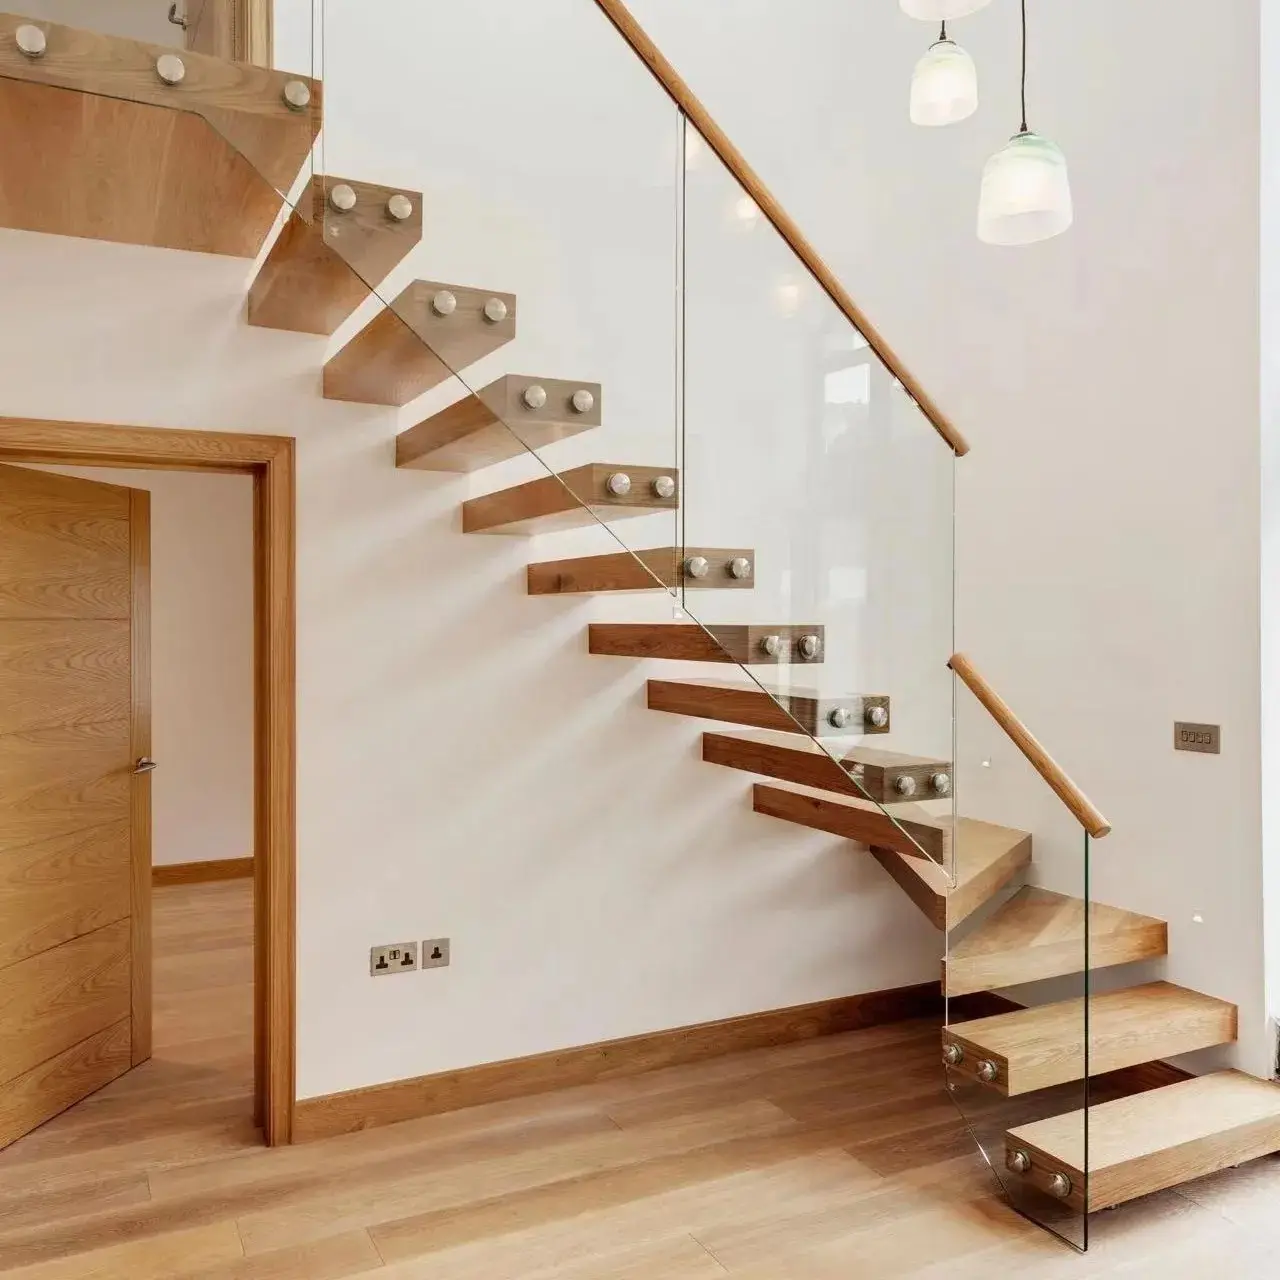 Dismountable Fabricated Steel Escalier Stainless Steel beam Straight Stairs Mono Stringer Staircase